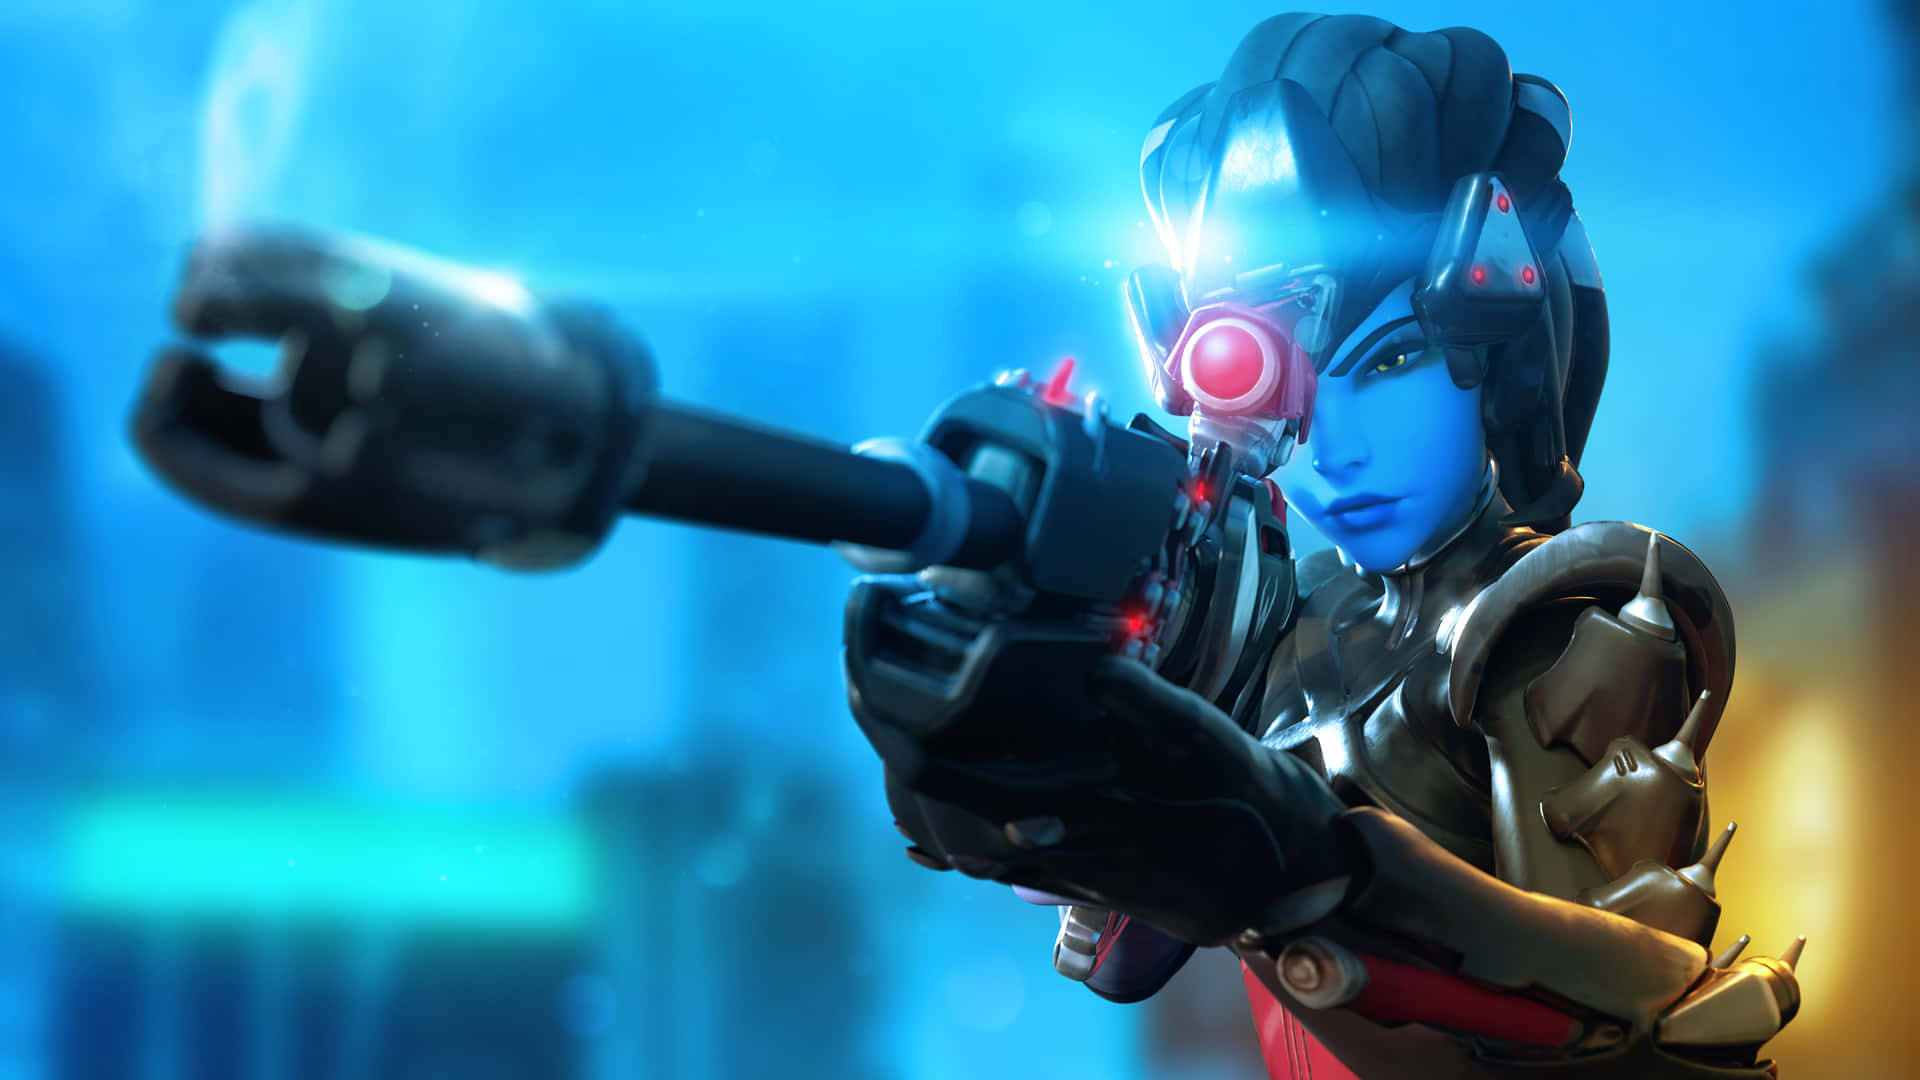 Widowmaker the Assassin with the Sniper Rifle Wallpaper